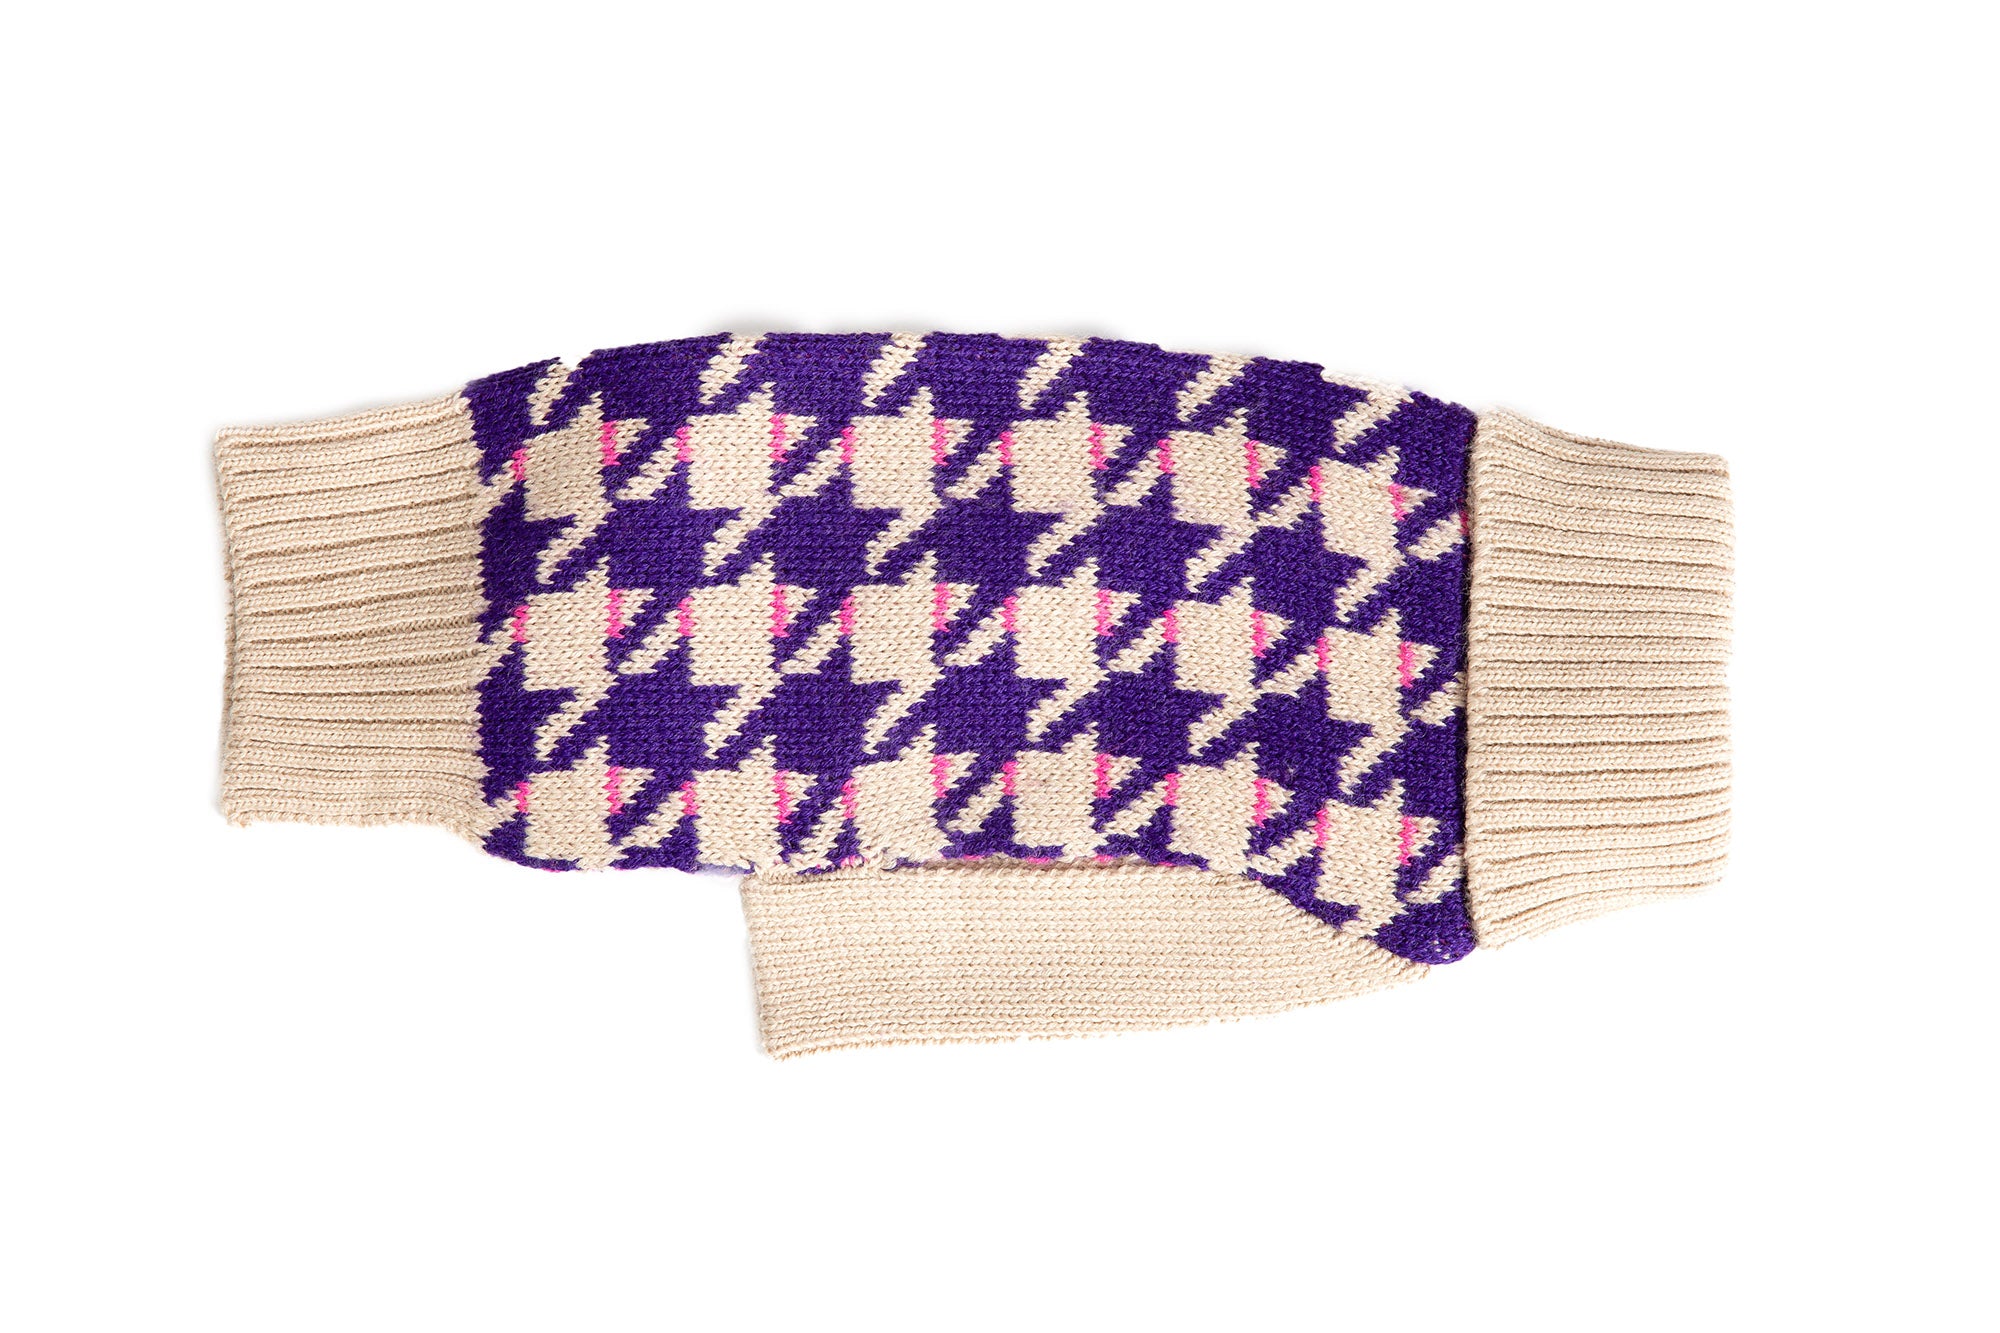 Herringbone His & Hers Wool Dog Sweater -  2 Color Options - Small & Large Dogs